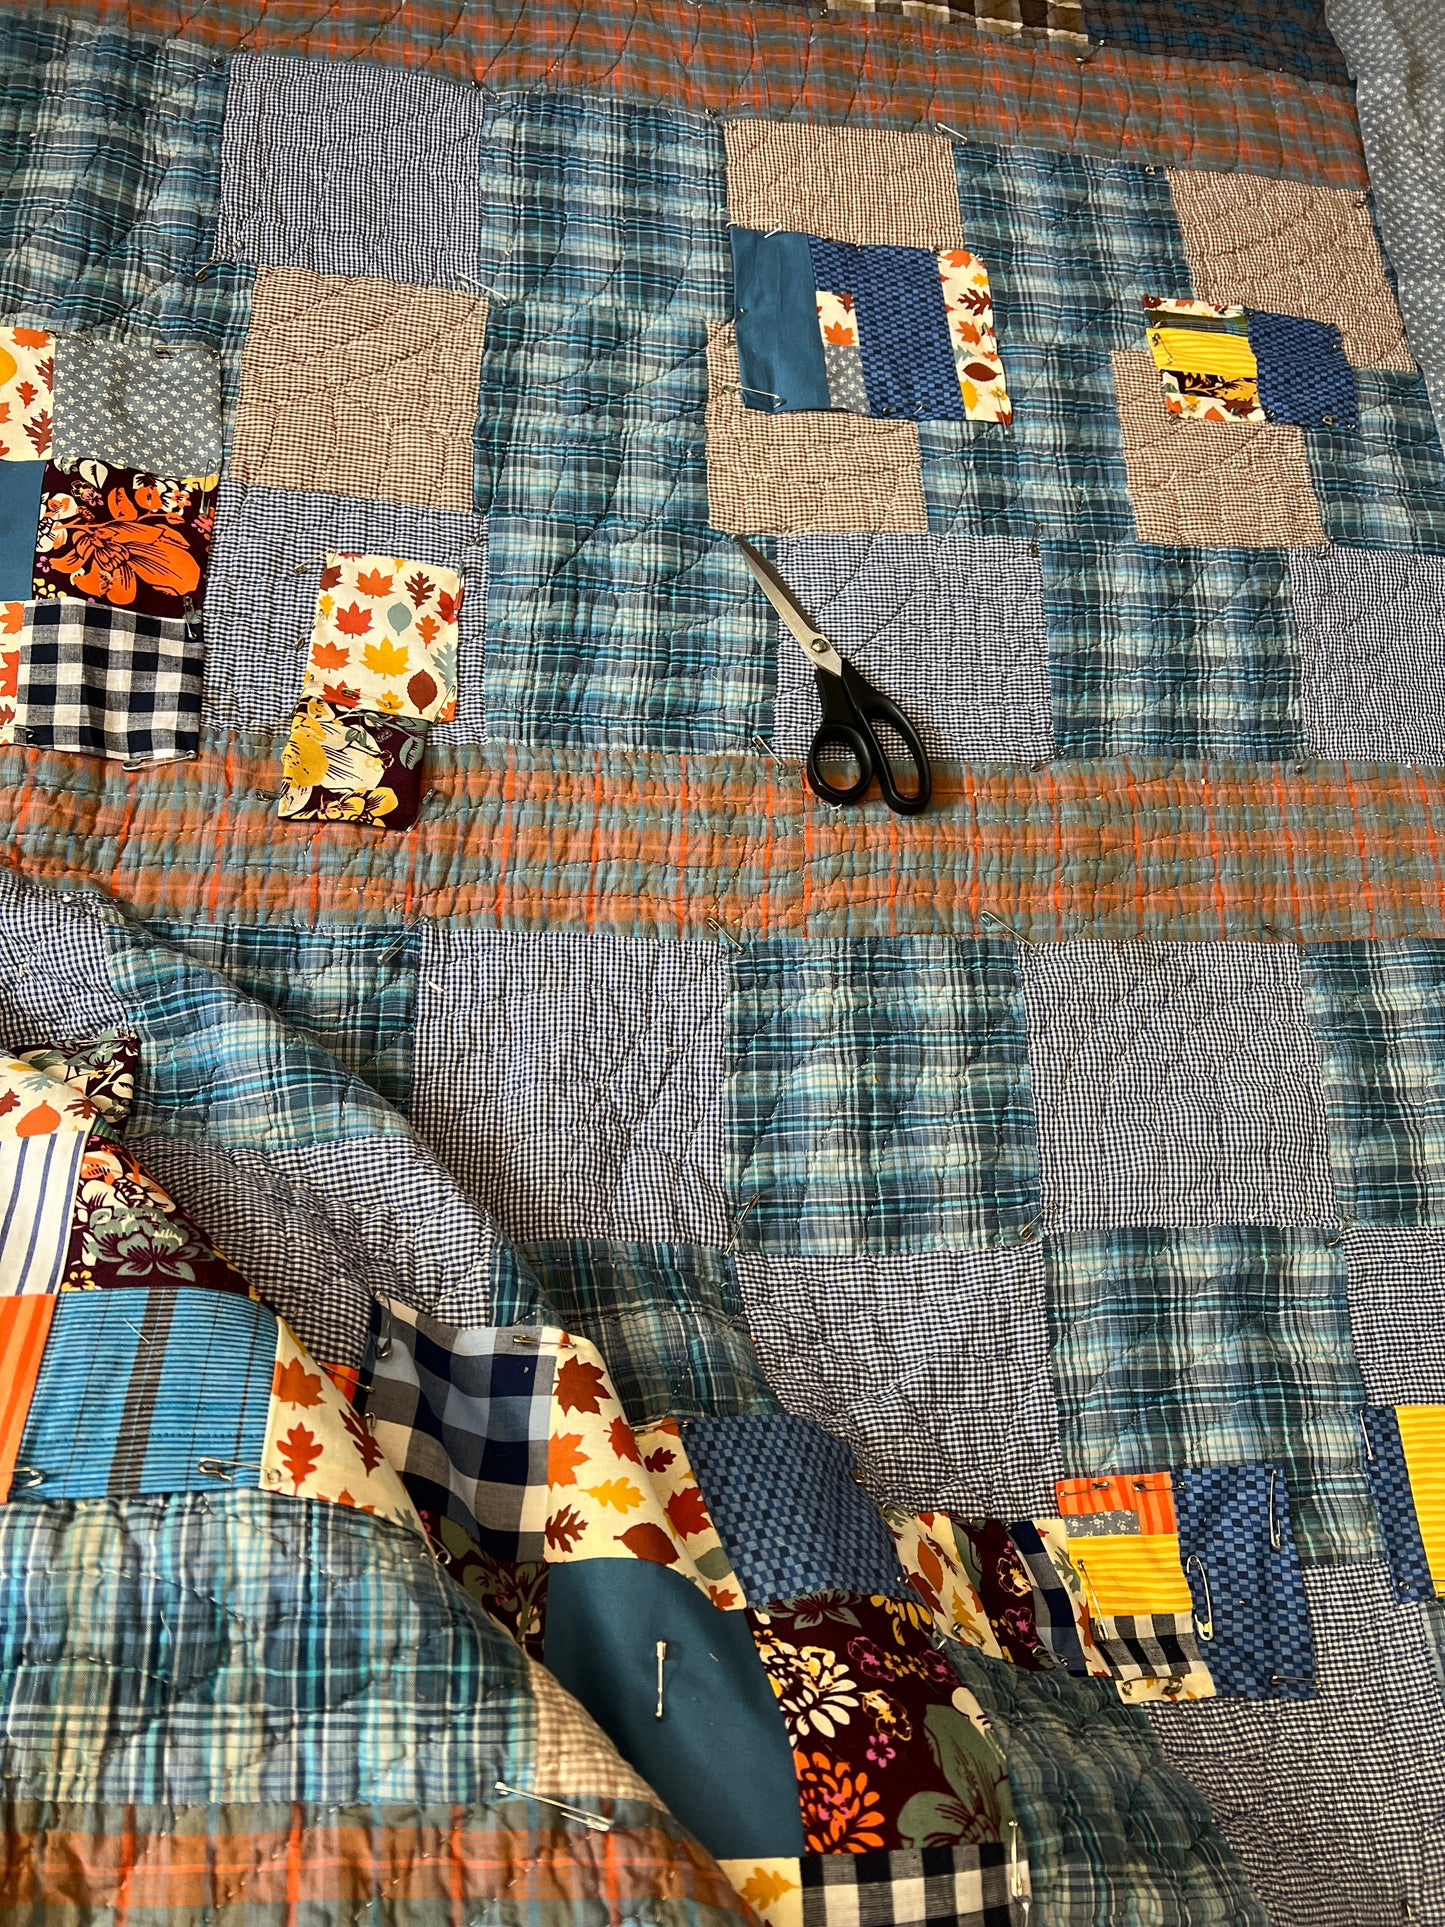 autumn blues quilt leaves closeup in progress, with scissors on top of quilt, and safety pines holding some squares in place